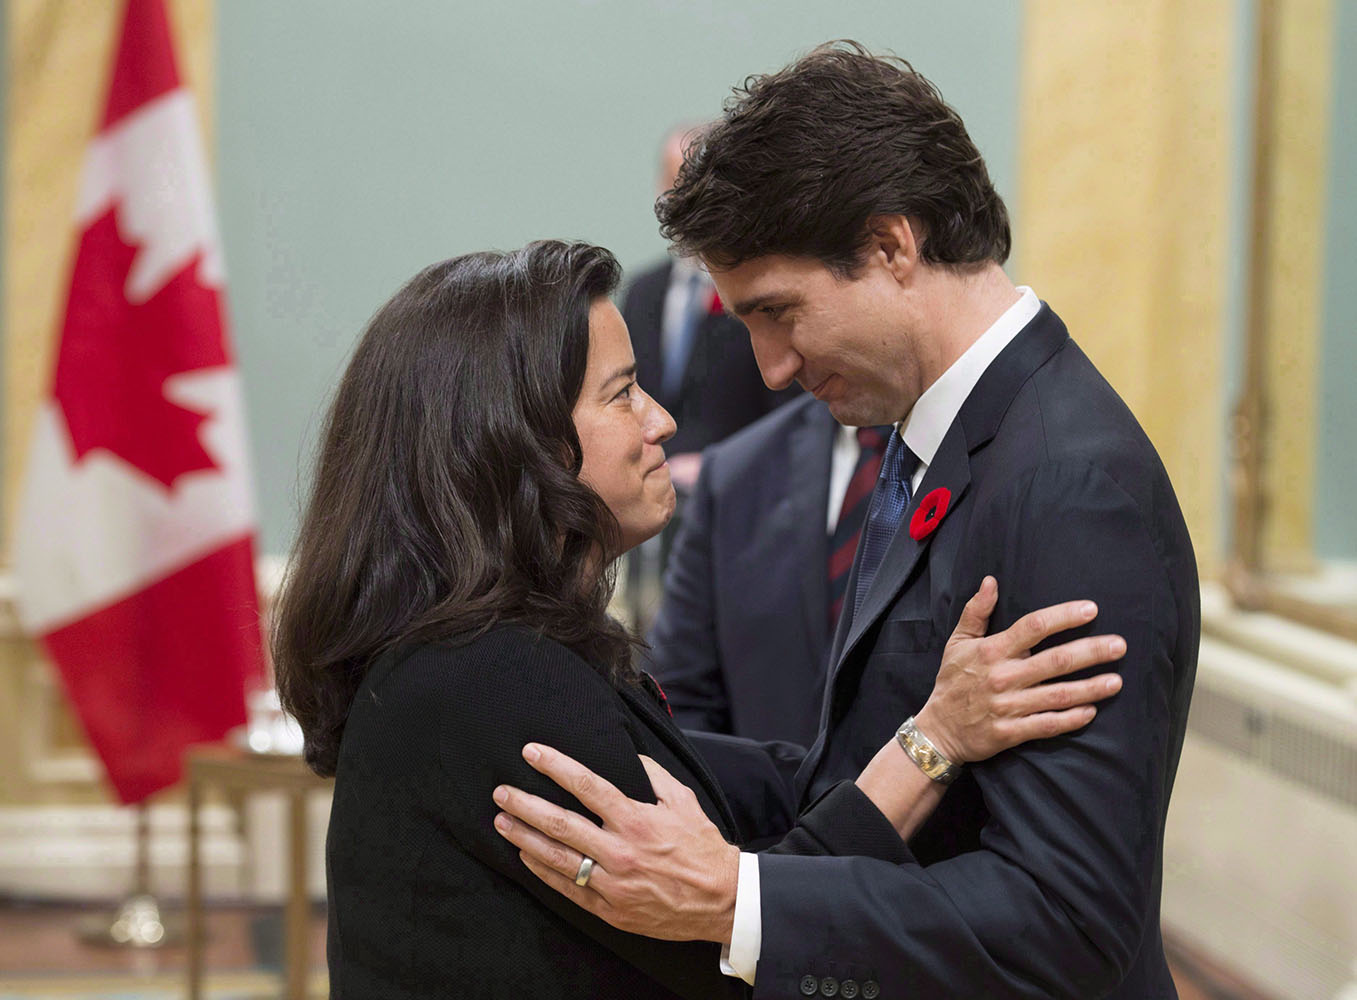 In Rideau Hall, Justin Trudeau and Jody Wilson-Raybould face each other and smile while standing close and holding onto each other's upper arms.